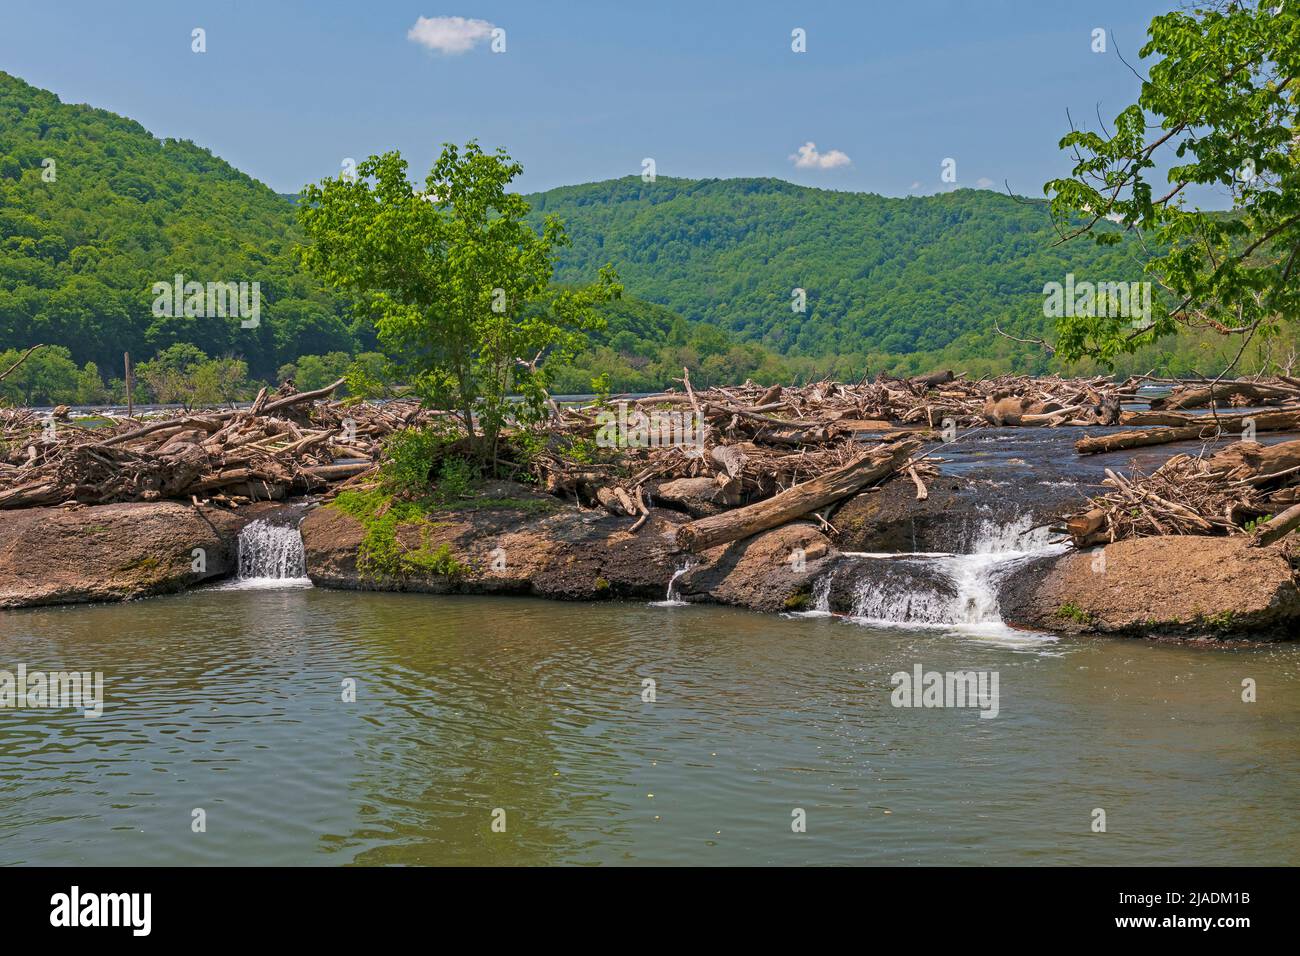 Green Hills Above an Appalachian River on the New River in West Virgina Stock Photo